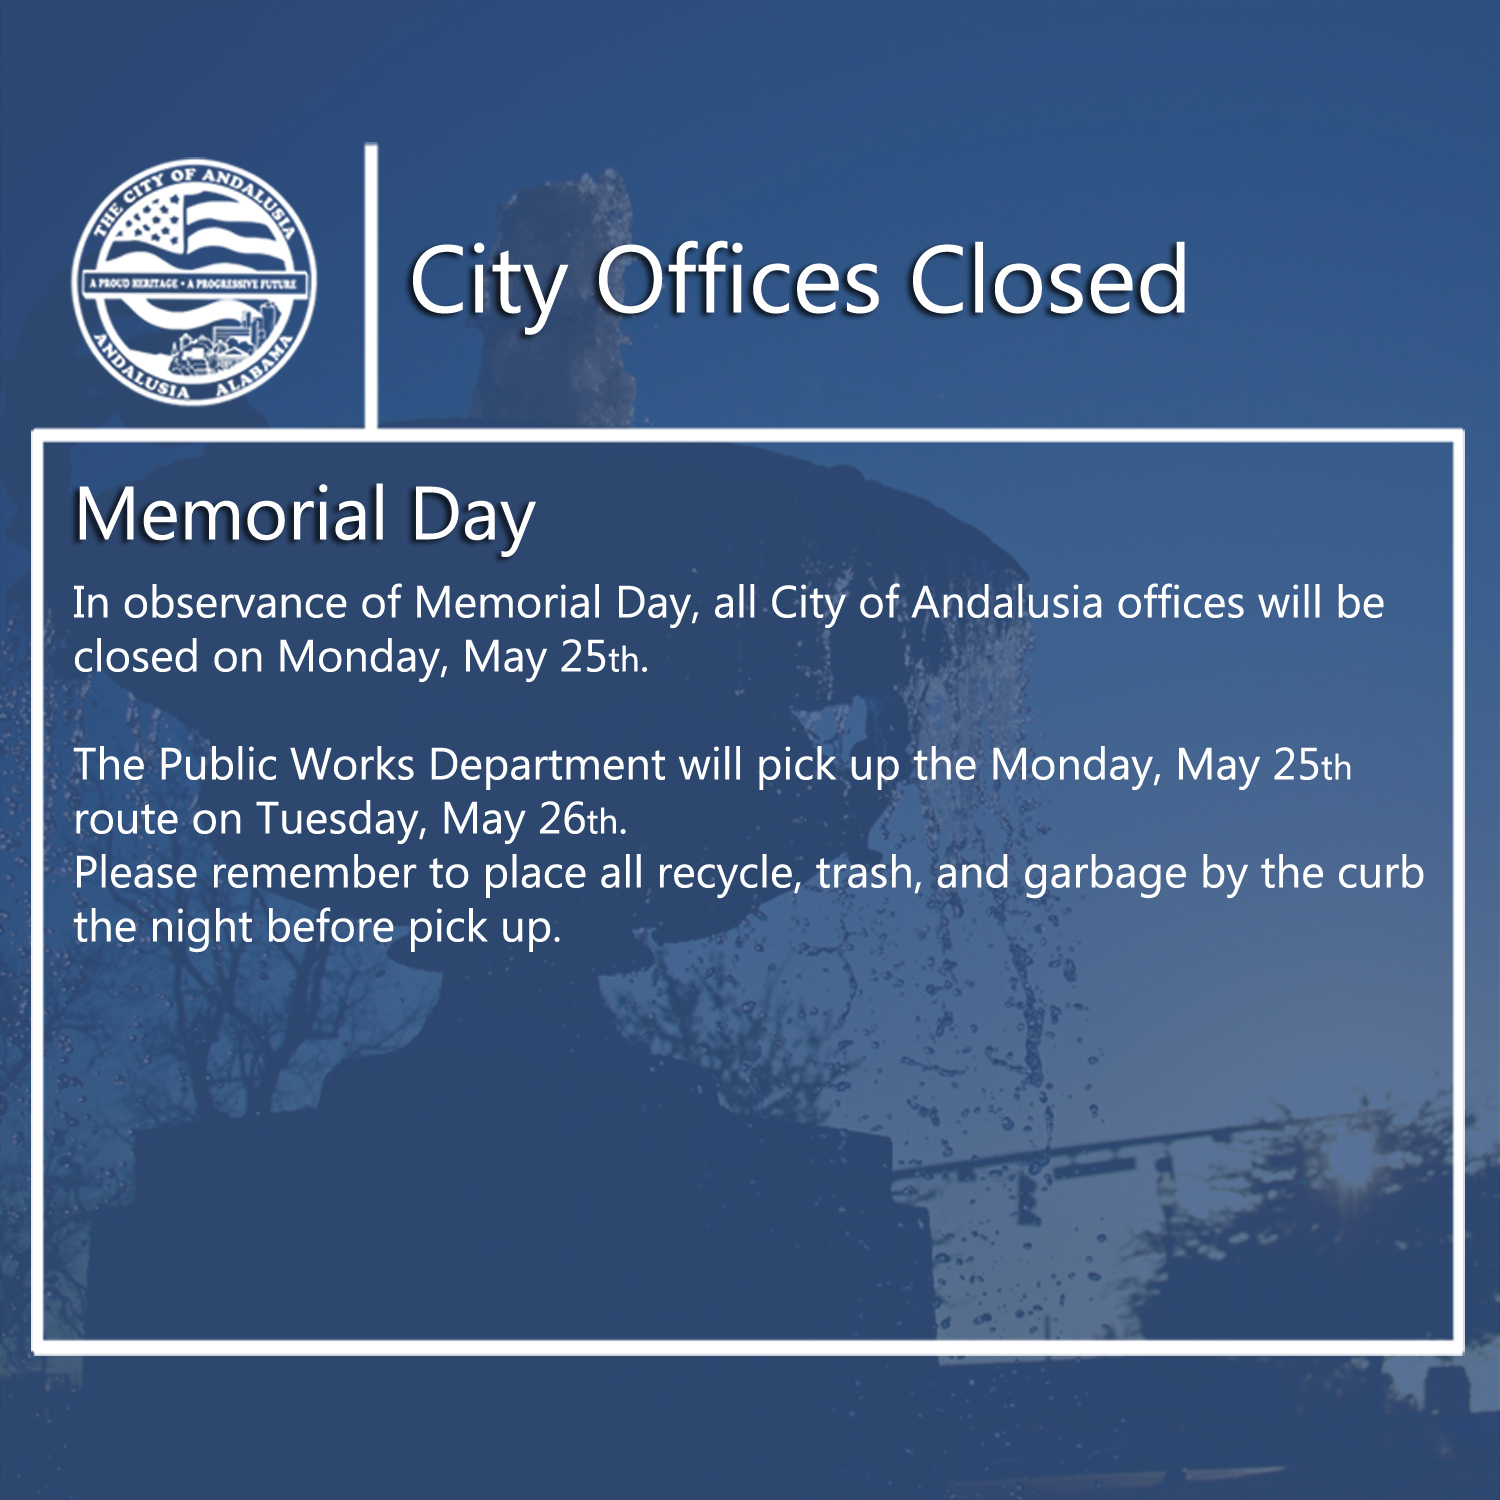 Facebook City Offices Closed May 25th